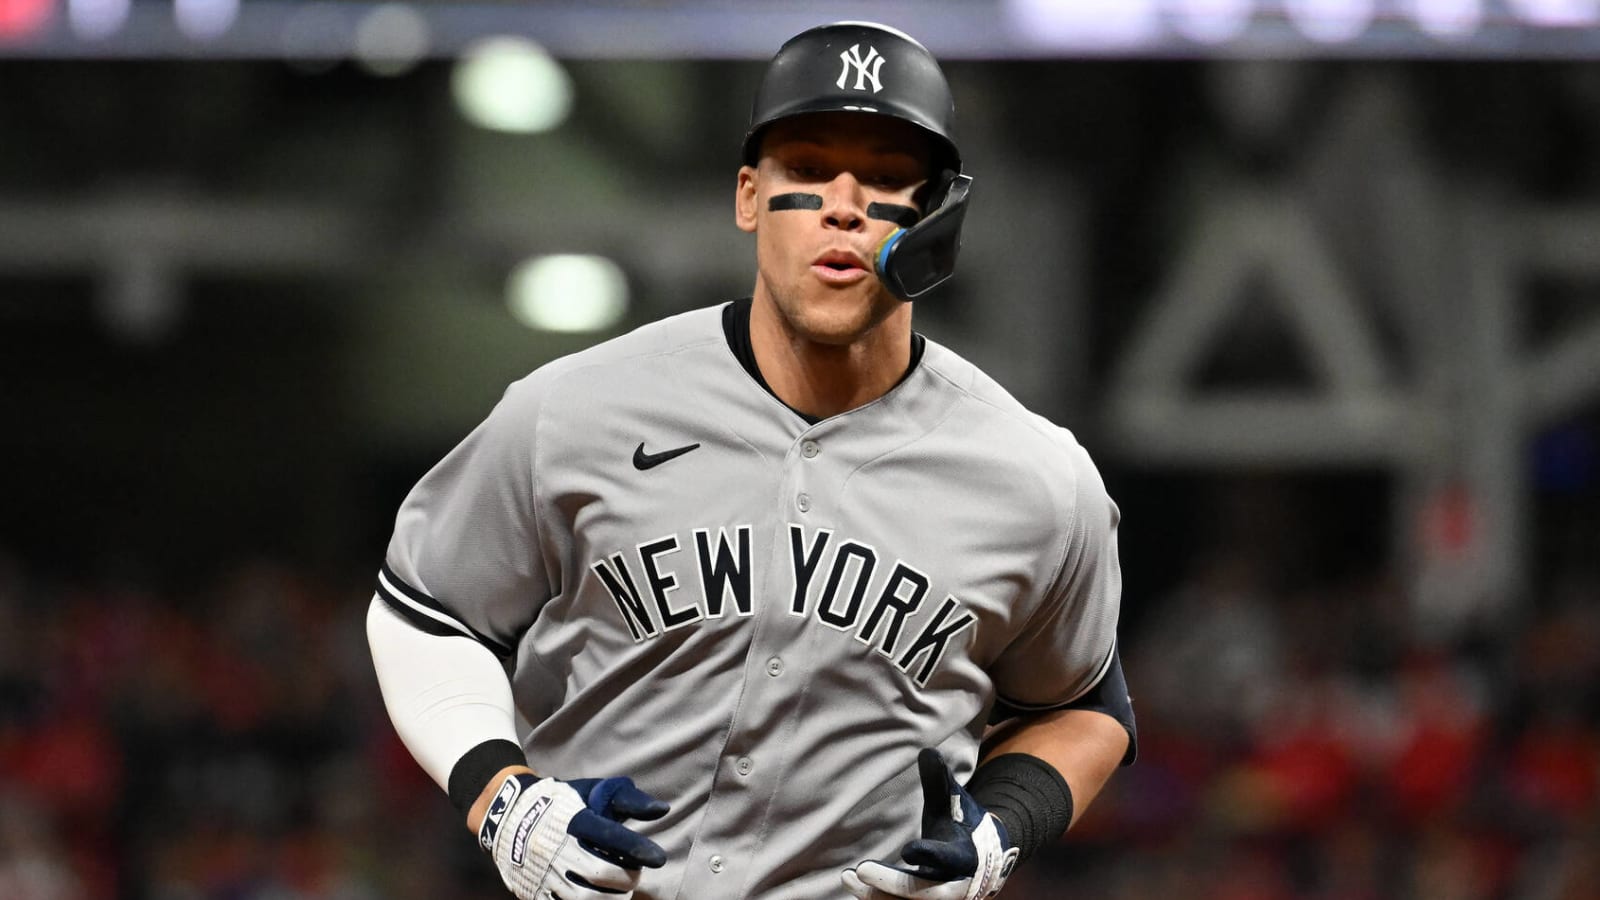 Aaron Judge's new nine-year deal gives him a chance to join pantheon of Yankees legends